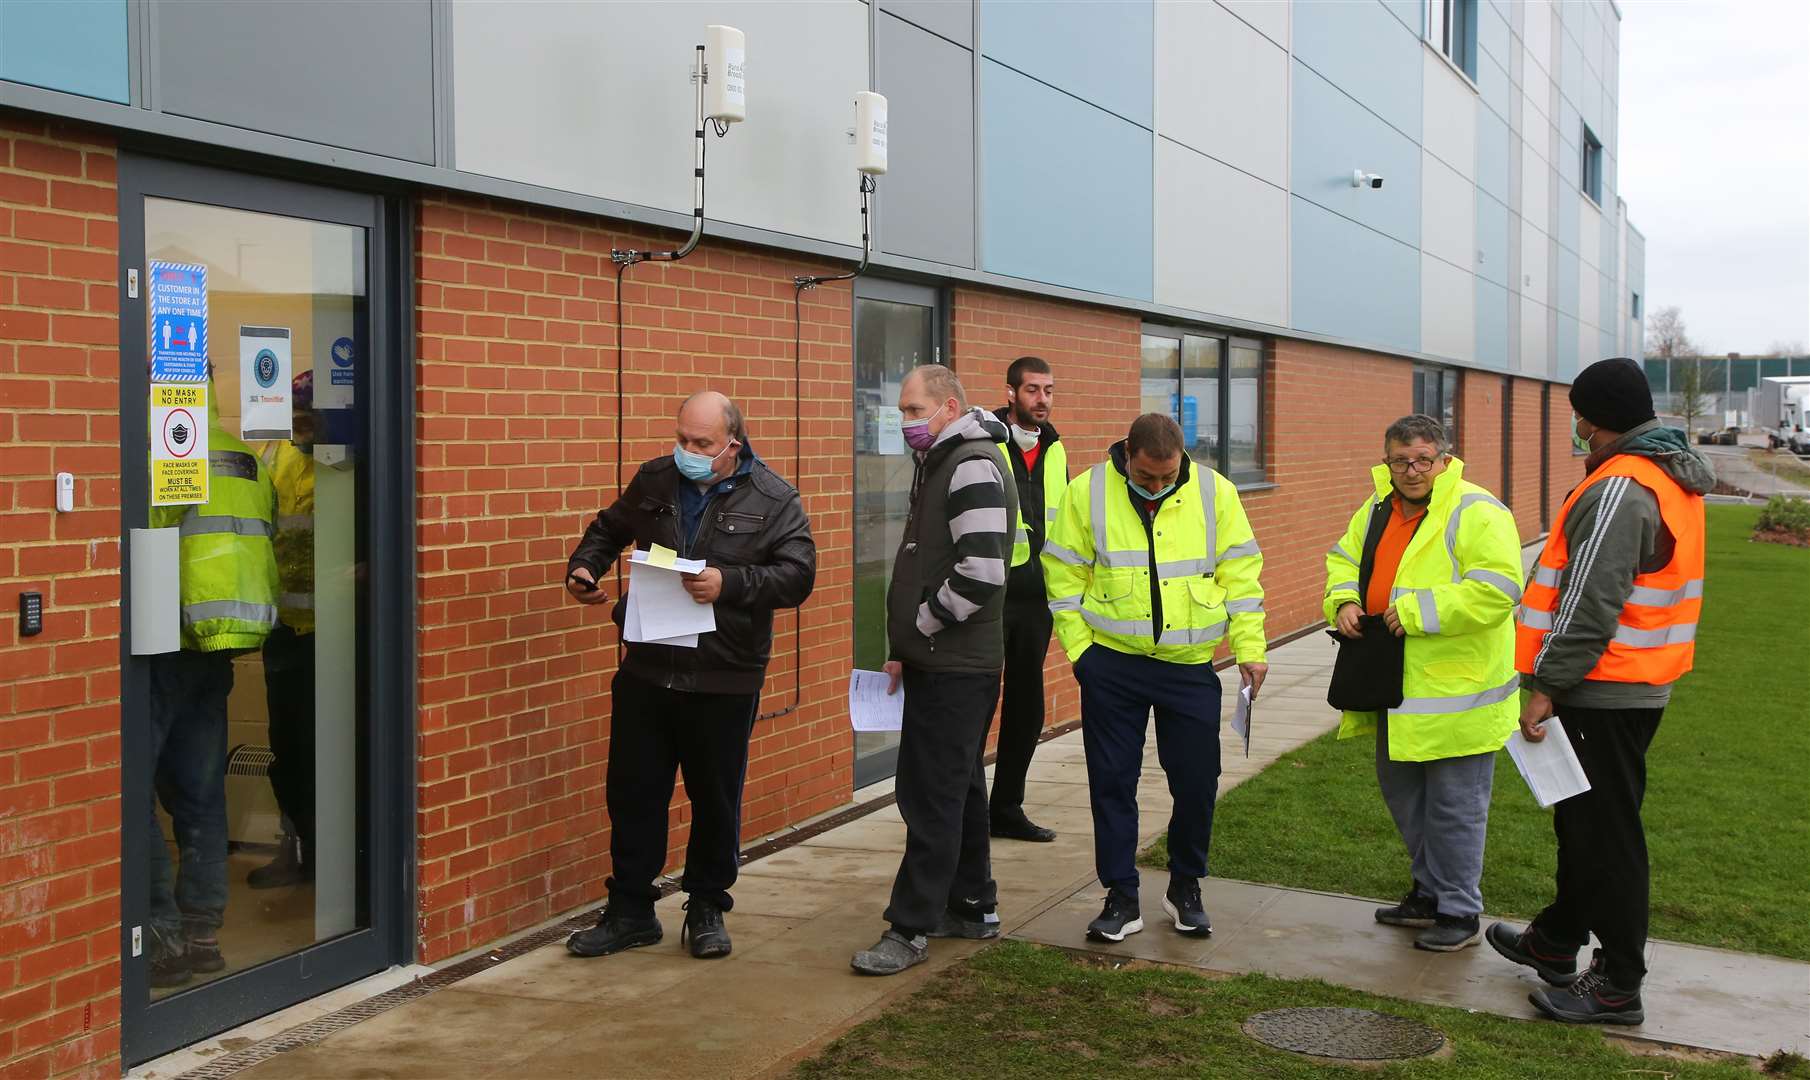 Lorry drivers queue to have their paperwork processed at a customs facility in Ashford, Kent (Gareth Fuller/PA)